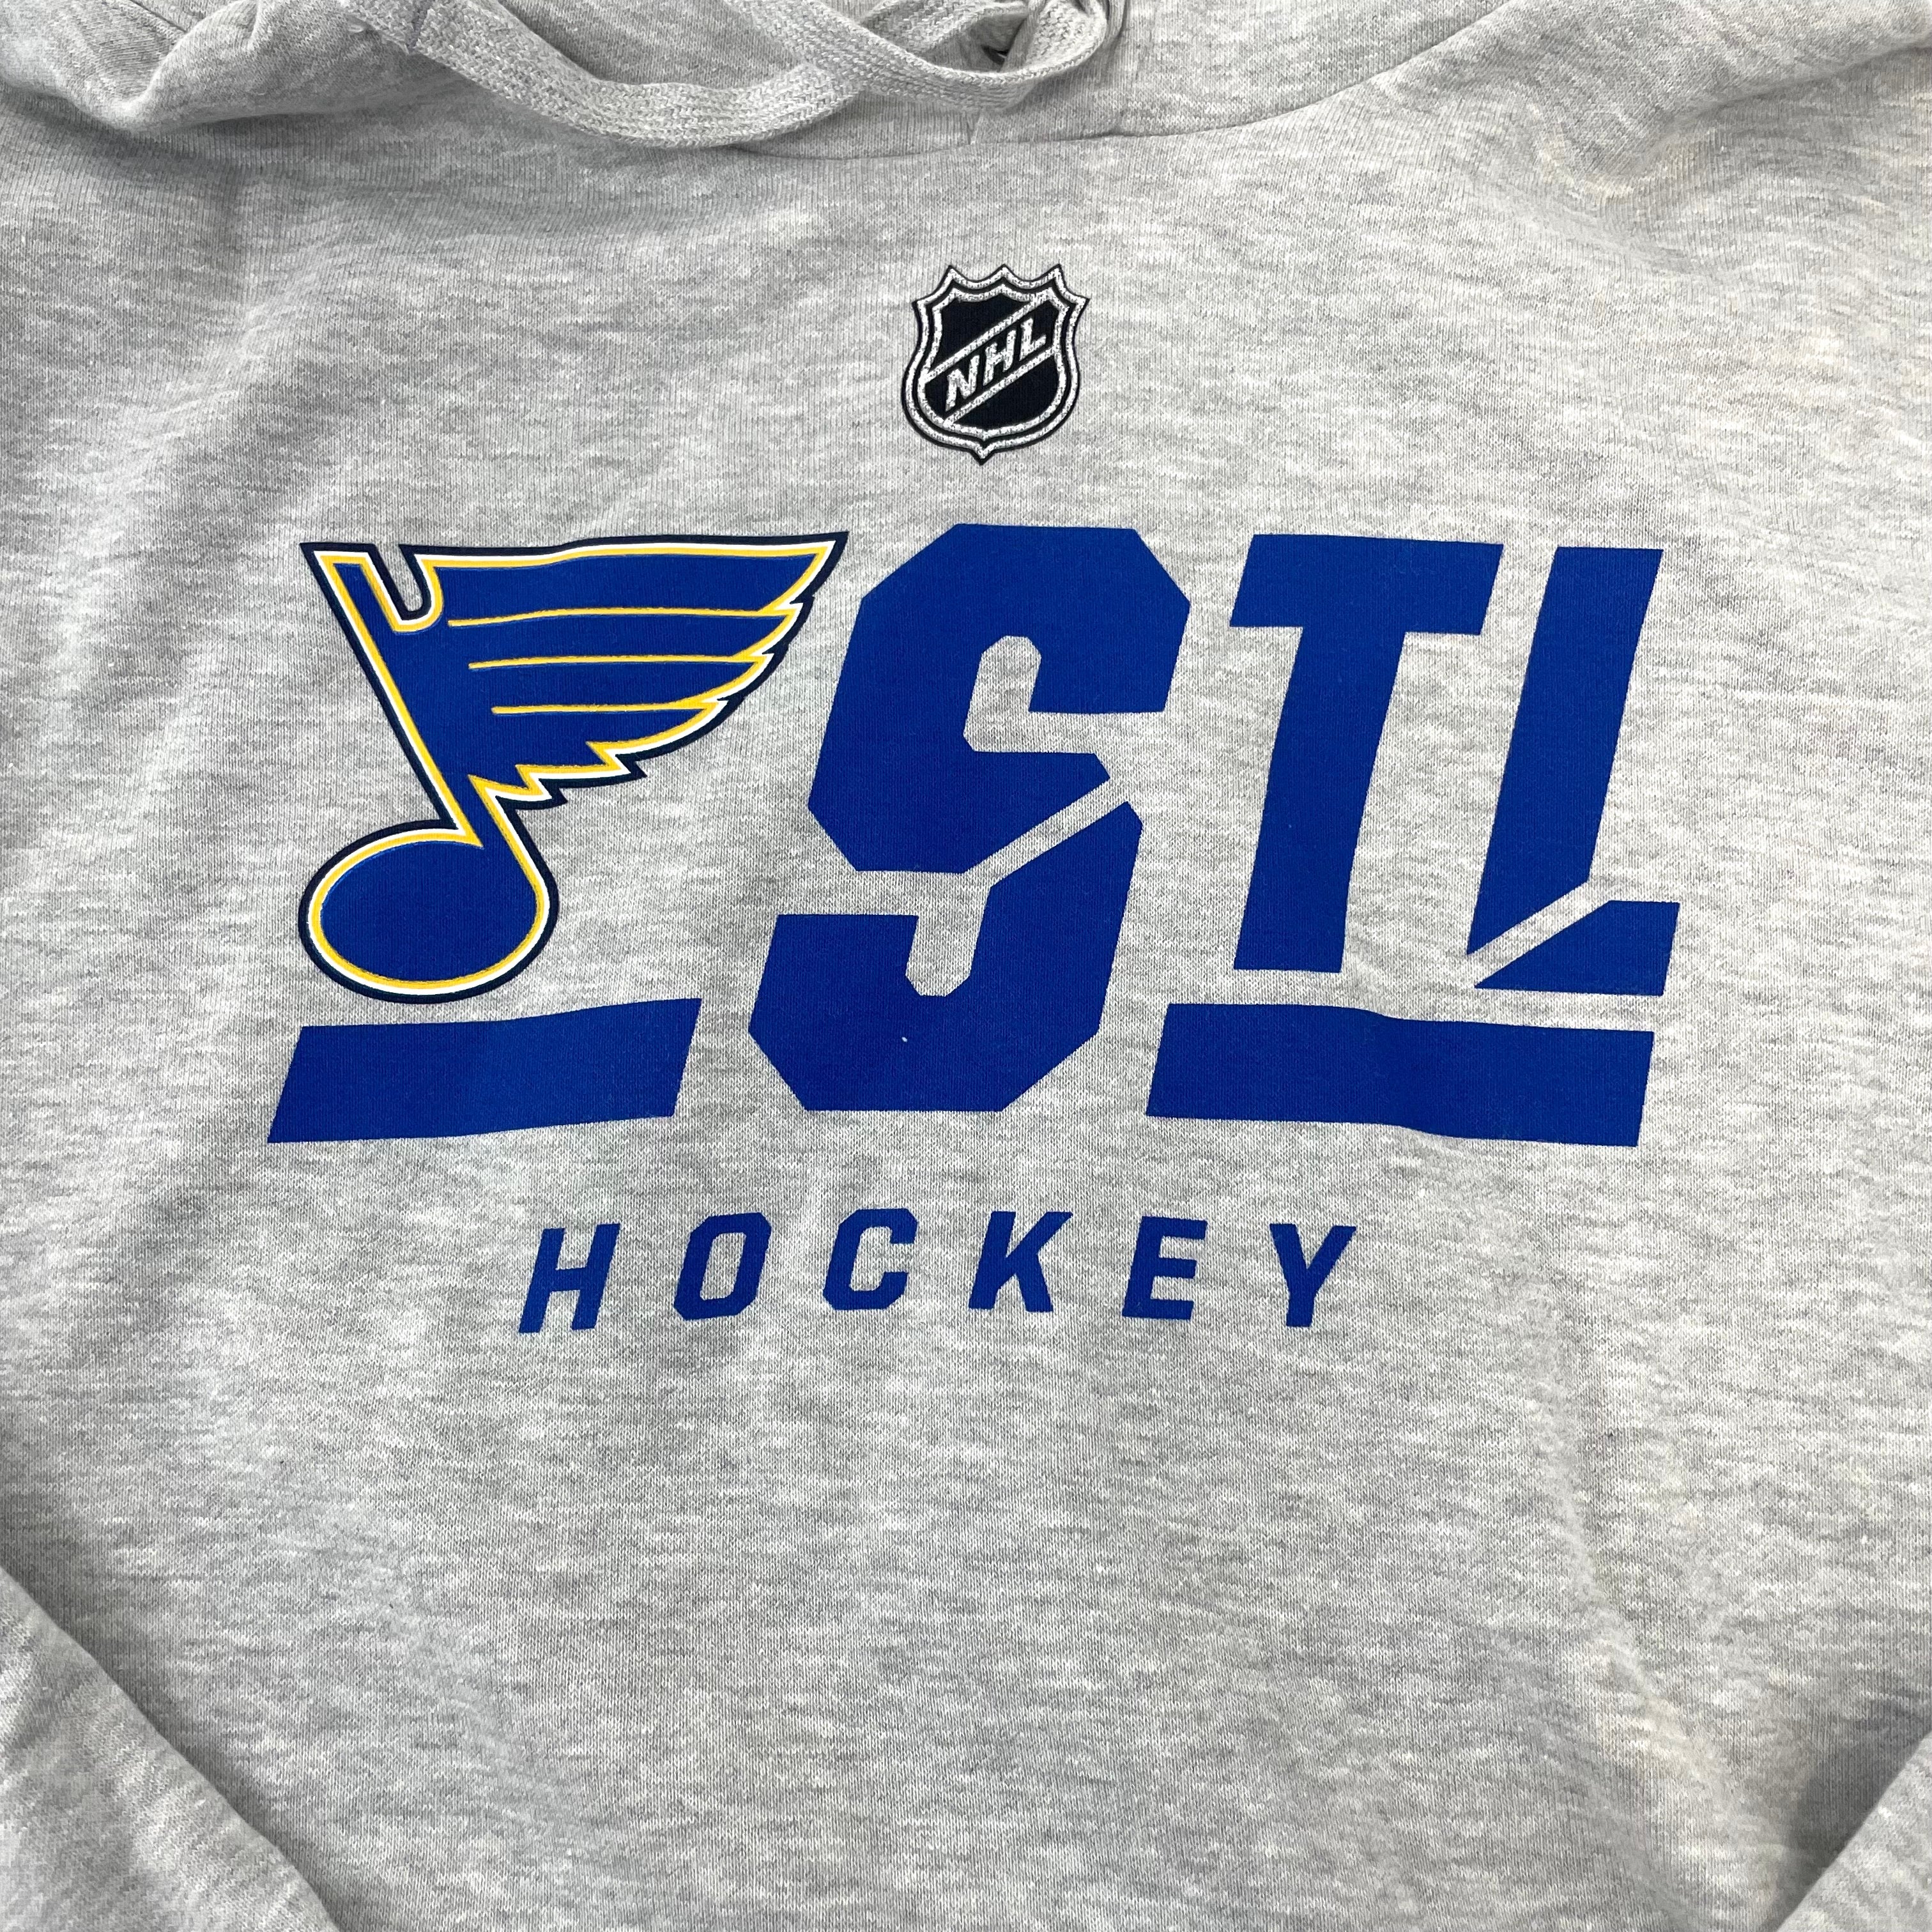 ST. LOUIS BLUES UNDER ARMOUR YOUTH GAMEDAY HOODIE - GRAY